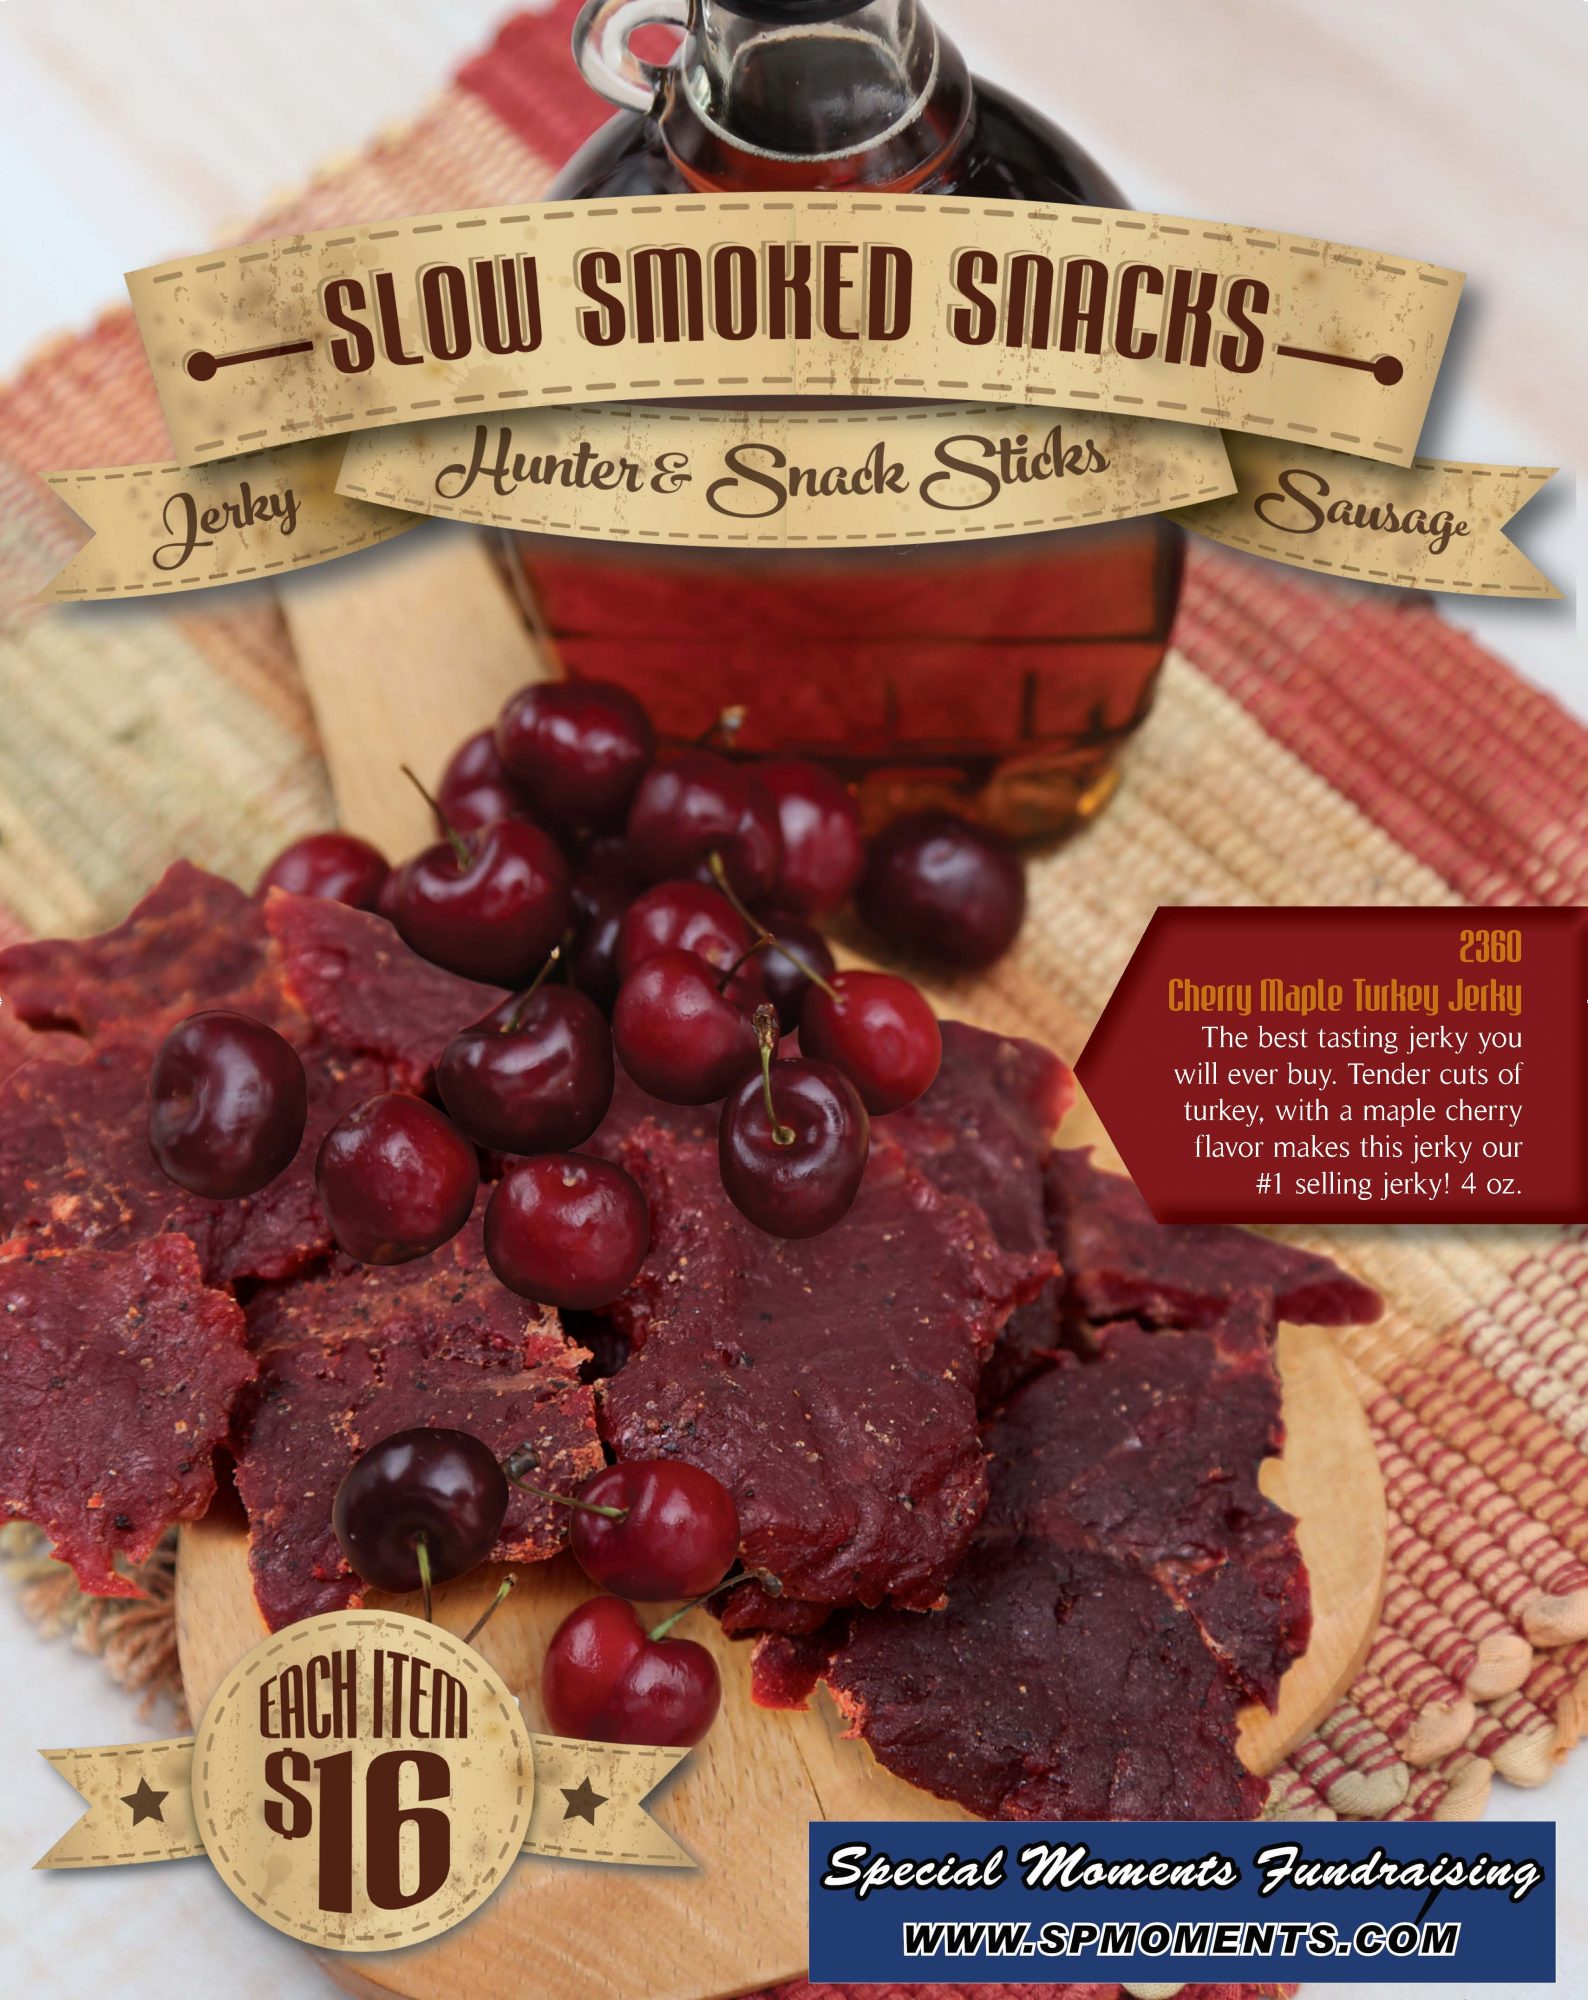 Slow Smoked Snacks Beef Jerky Brochure Cover Cropped